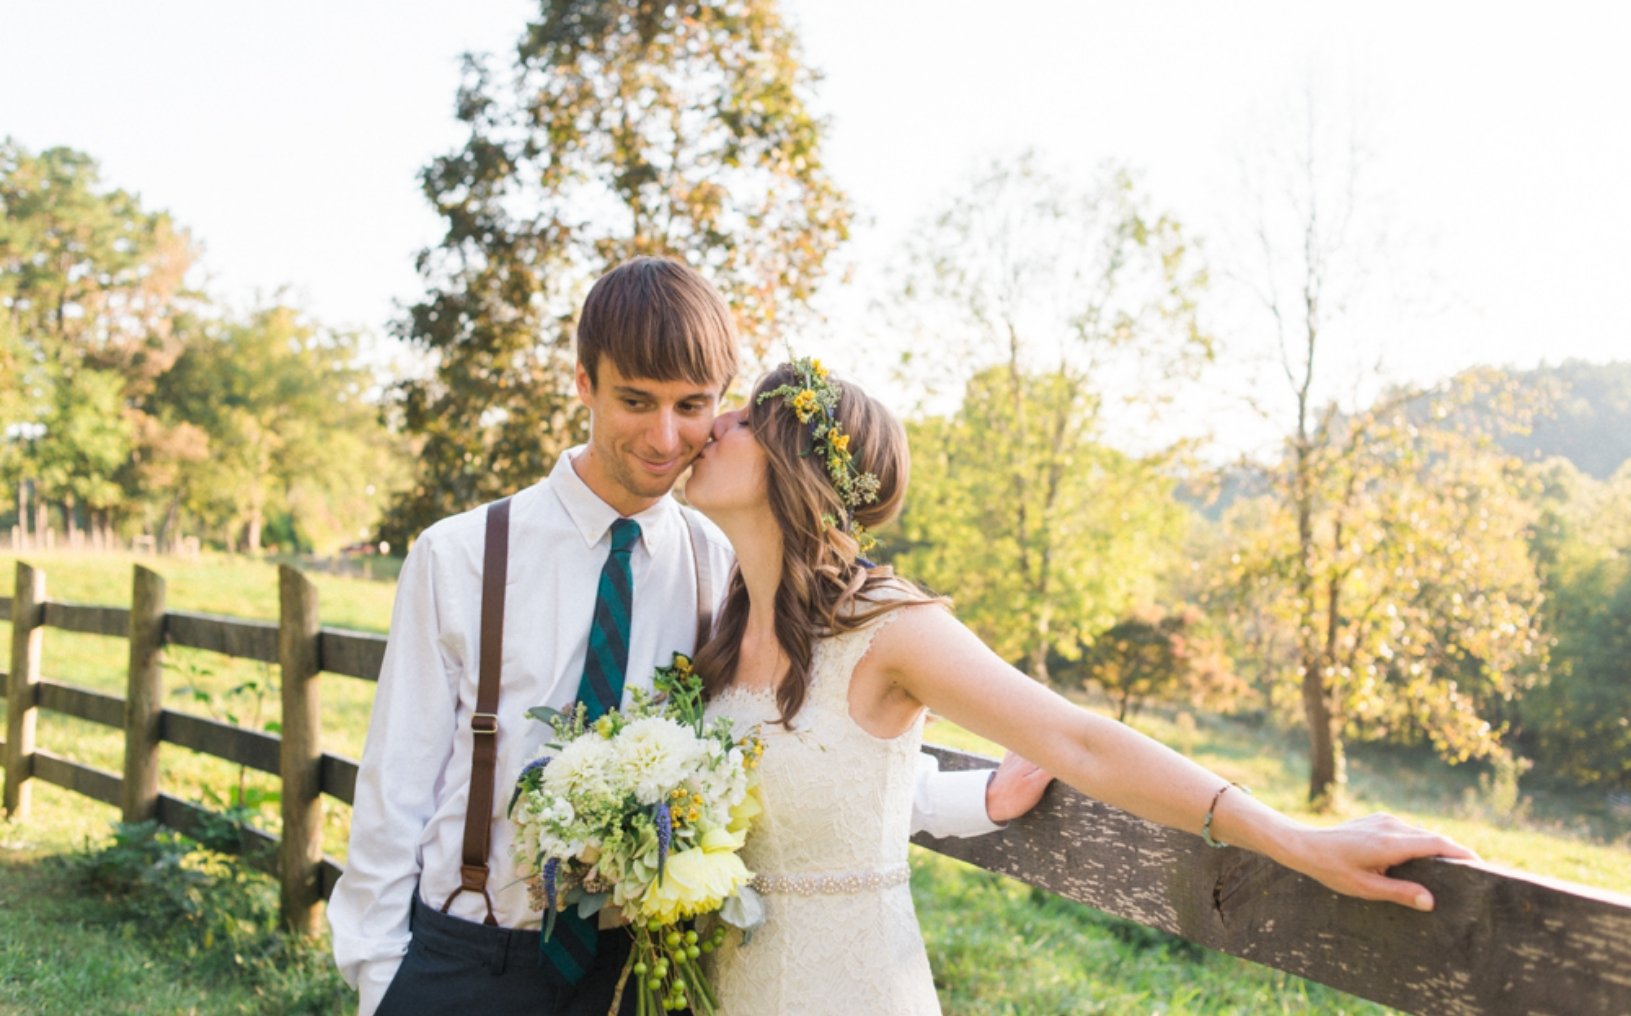 Yesterday Spaces | Rustic and Elegant Weddings in the Blue Ridge Mountains